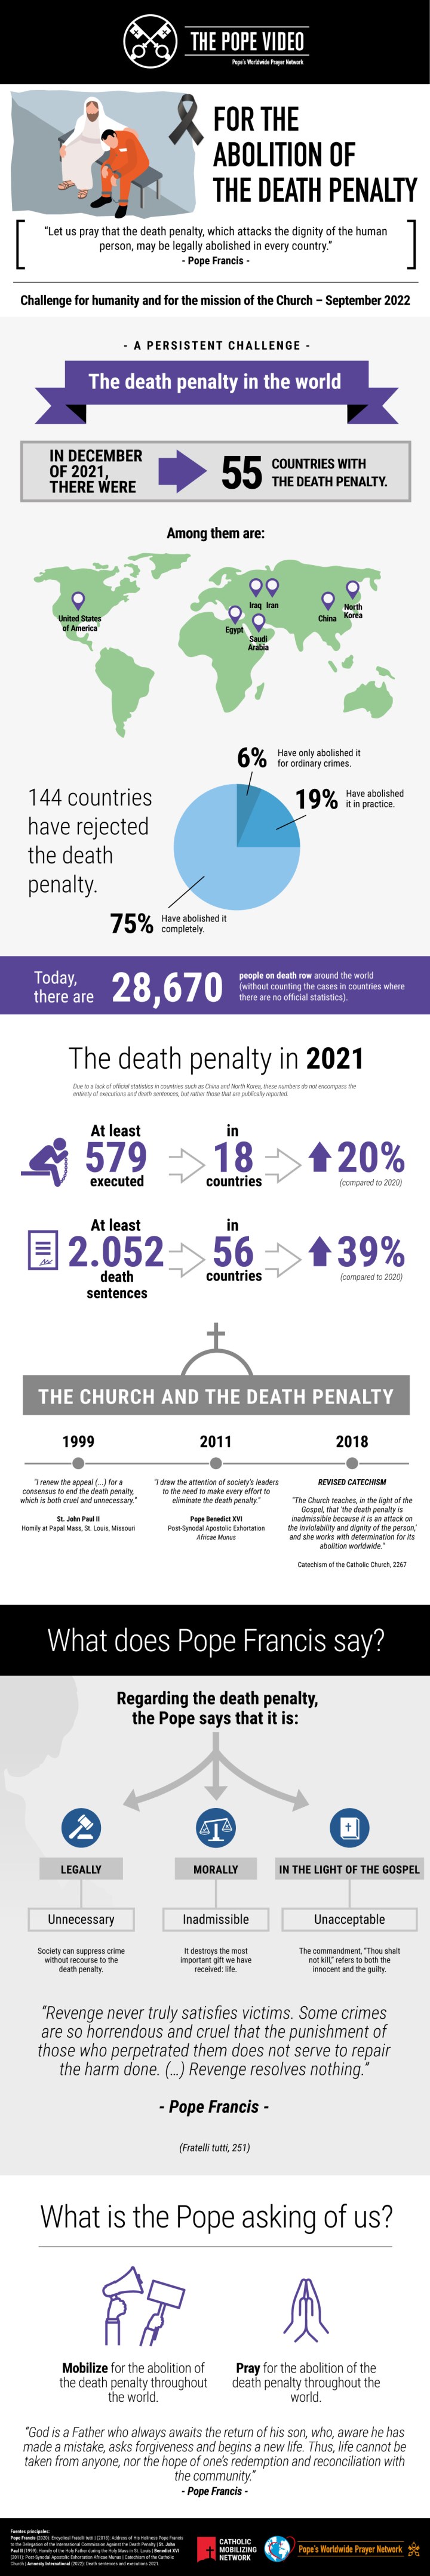 Infographic-TPV-9-2022-EN-For-the-abolition-of-the-death-penalty.jpg